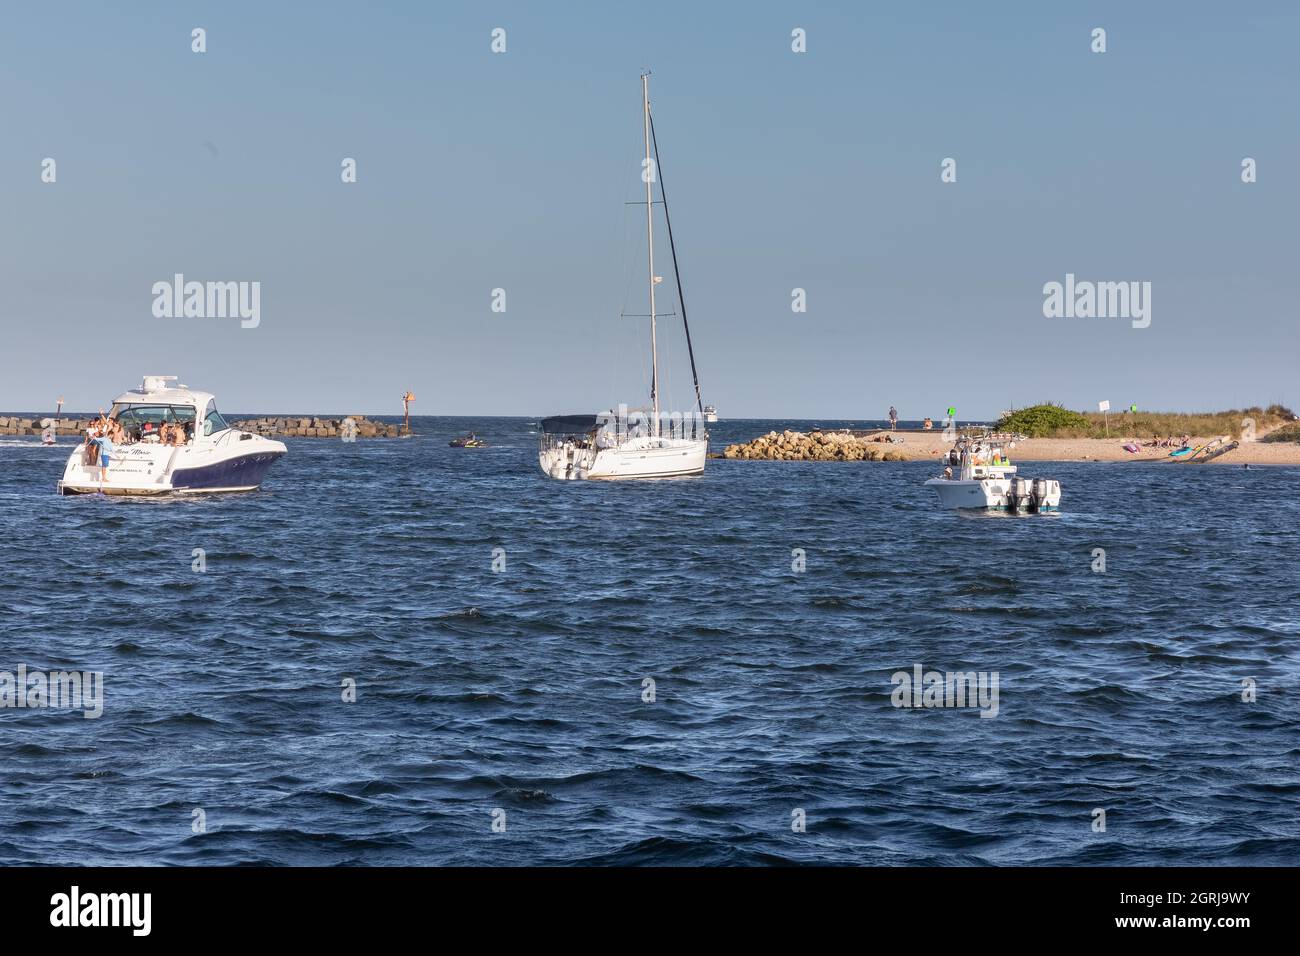 POMPANO BEACH FLORIDA, UNITED STATES - May 29, 2021: Different yachts and boats in a small bay by the Atlantic Ocean at the Pompano Beach, Florida Stock Photo